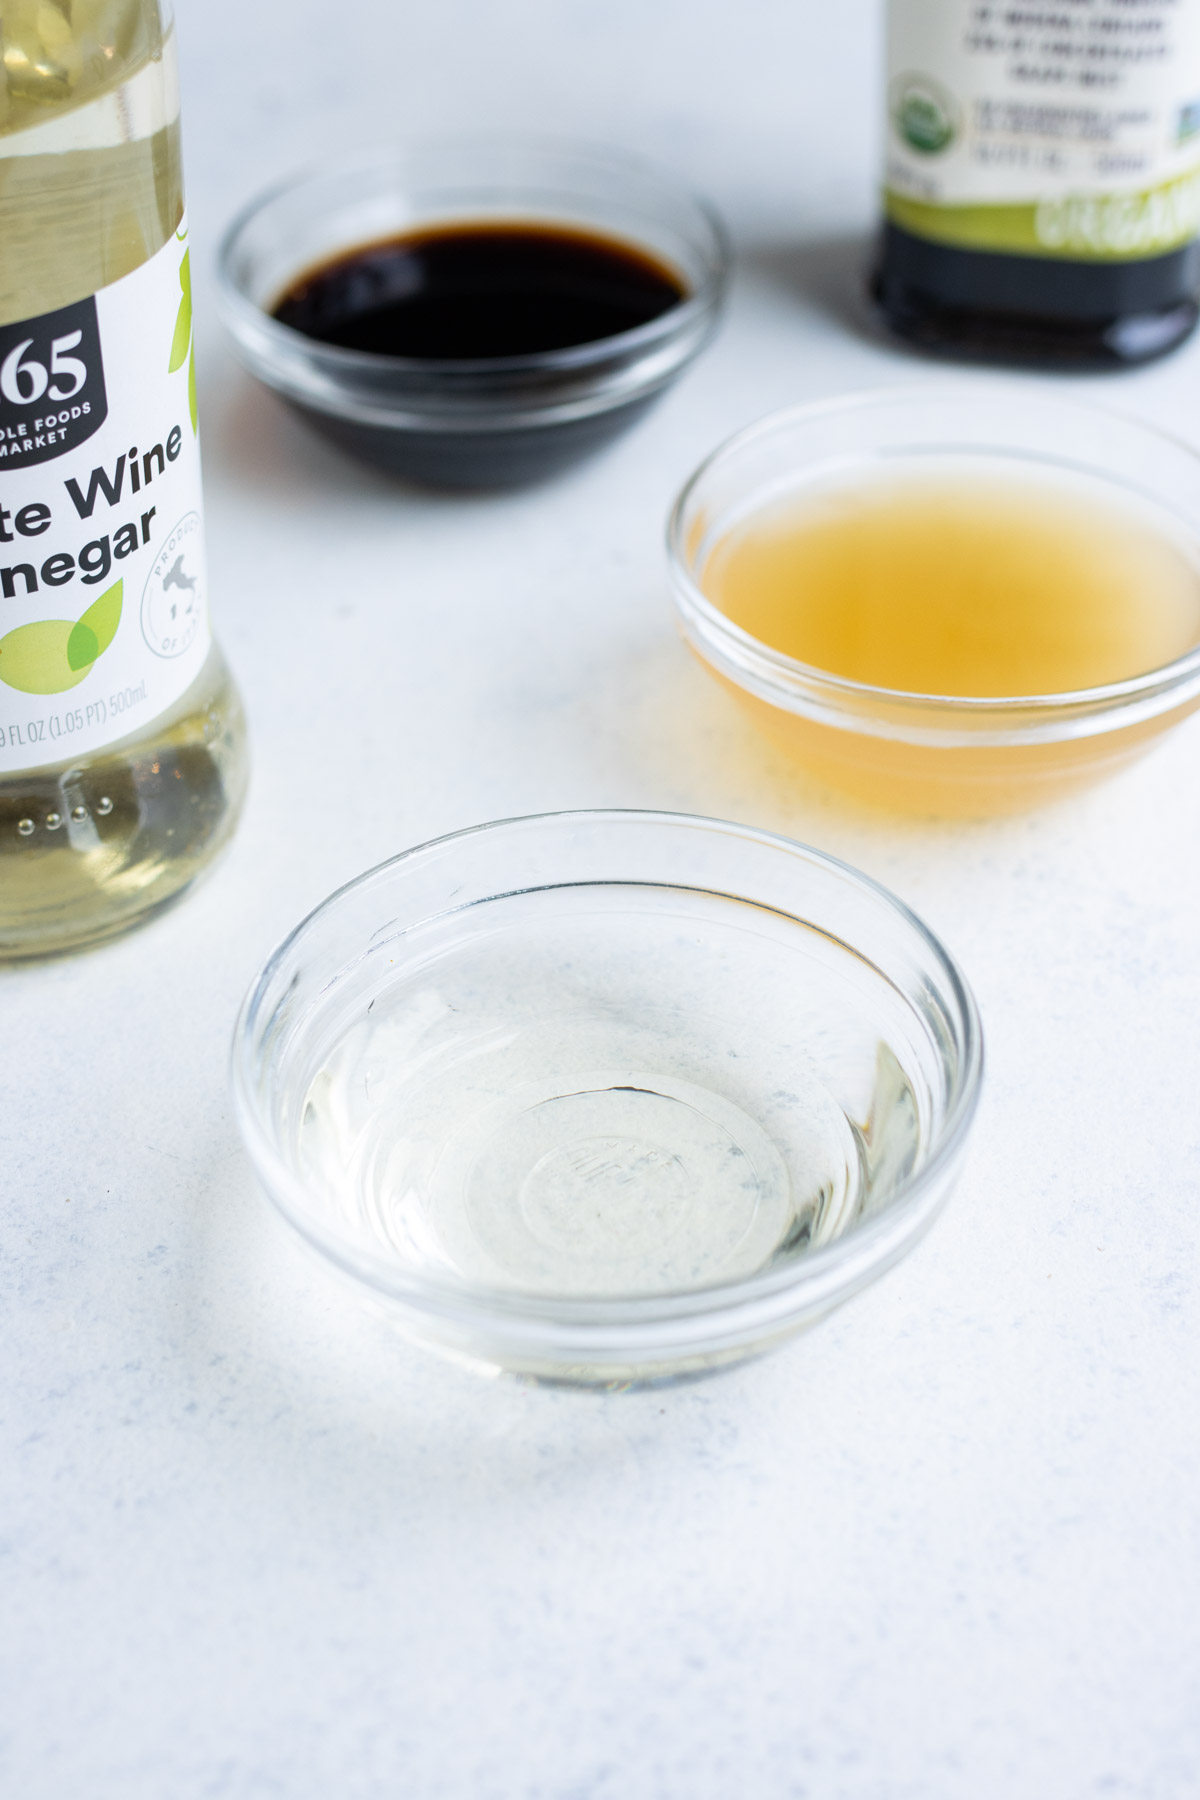 Close-up of white wine vinegar in a small, glass bowl with other vinegars in the background.